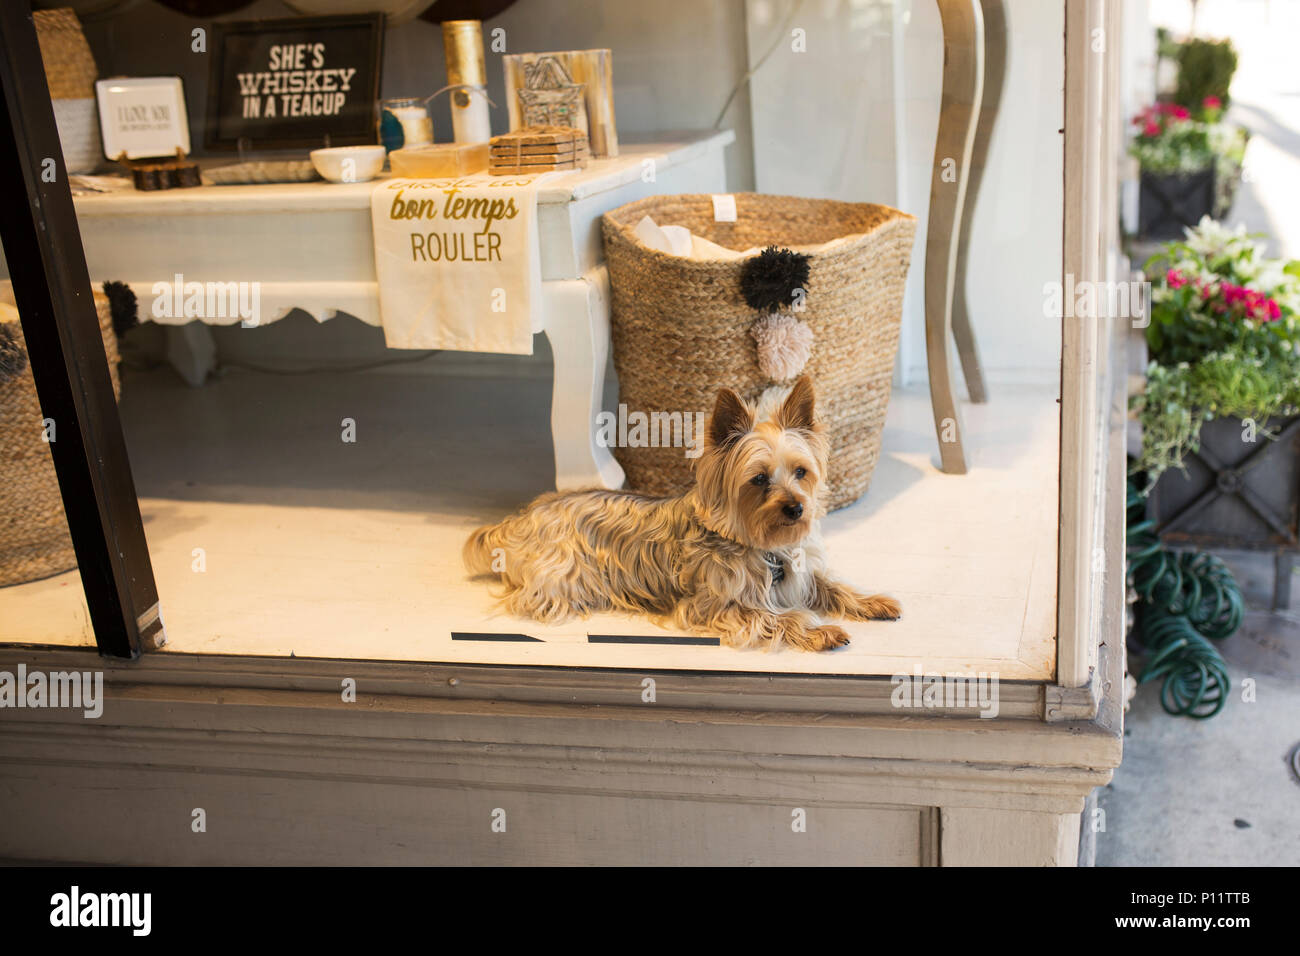 A Cairn terrier stands guard from a shop window on Magazine Street in the Garden District of New Orleans, Louisiana, USA. Stock Photo